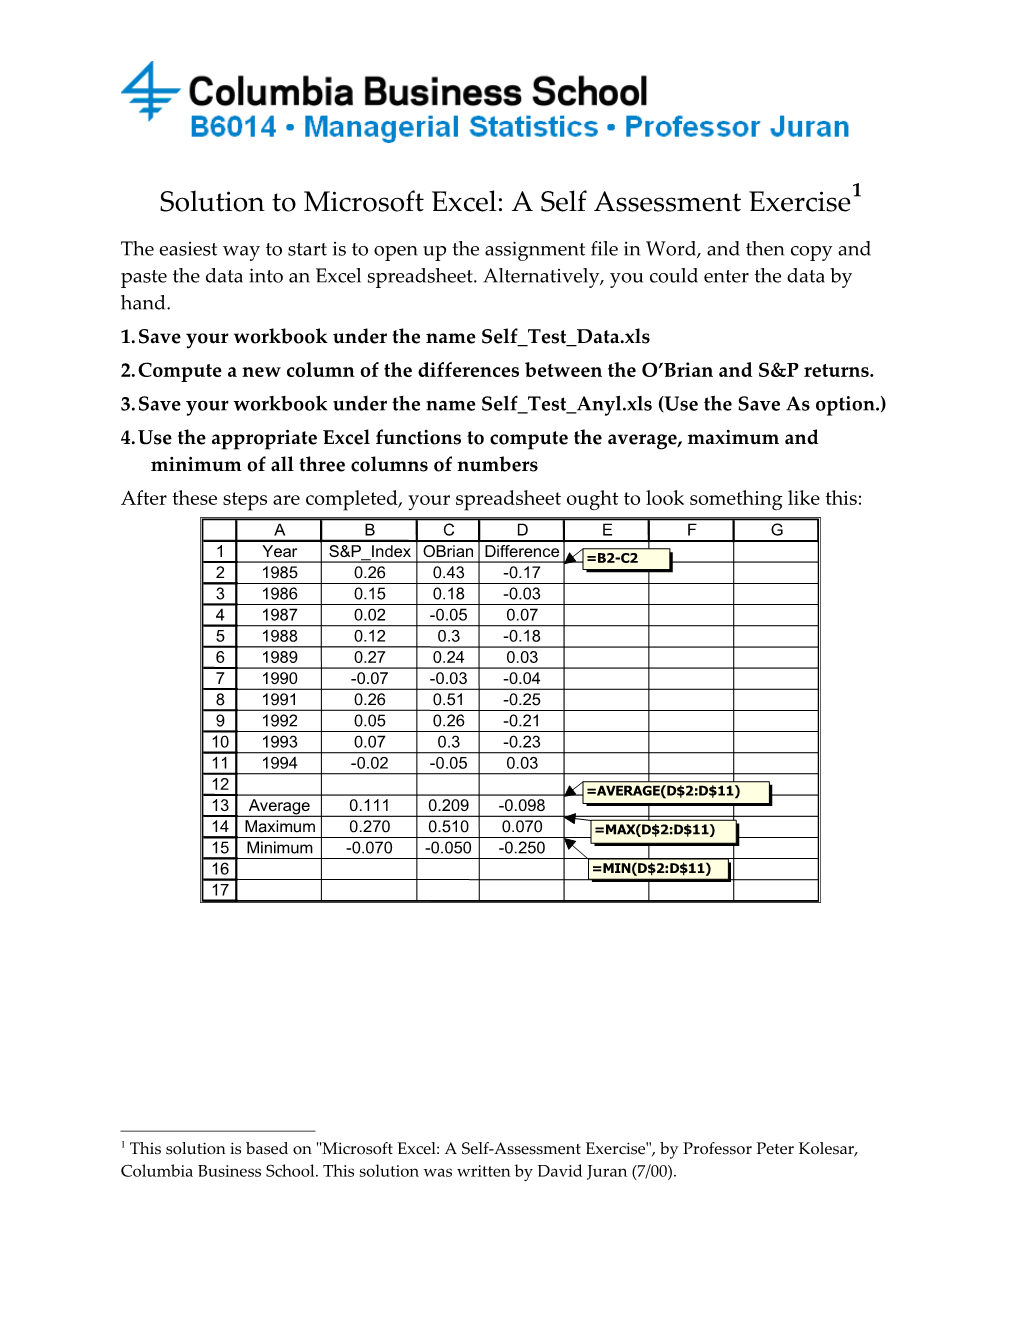 Solution to Microsoft Excel: a Self Assessment Exercise 1